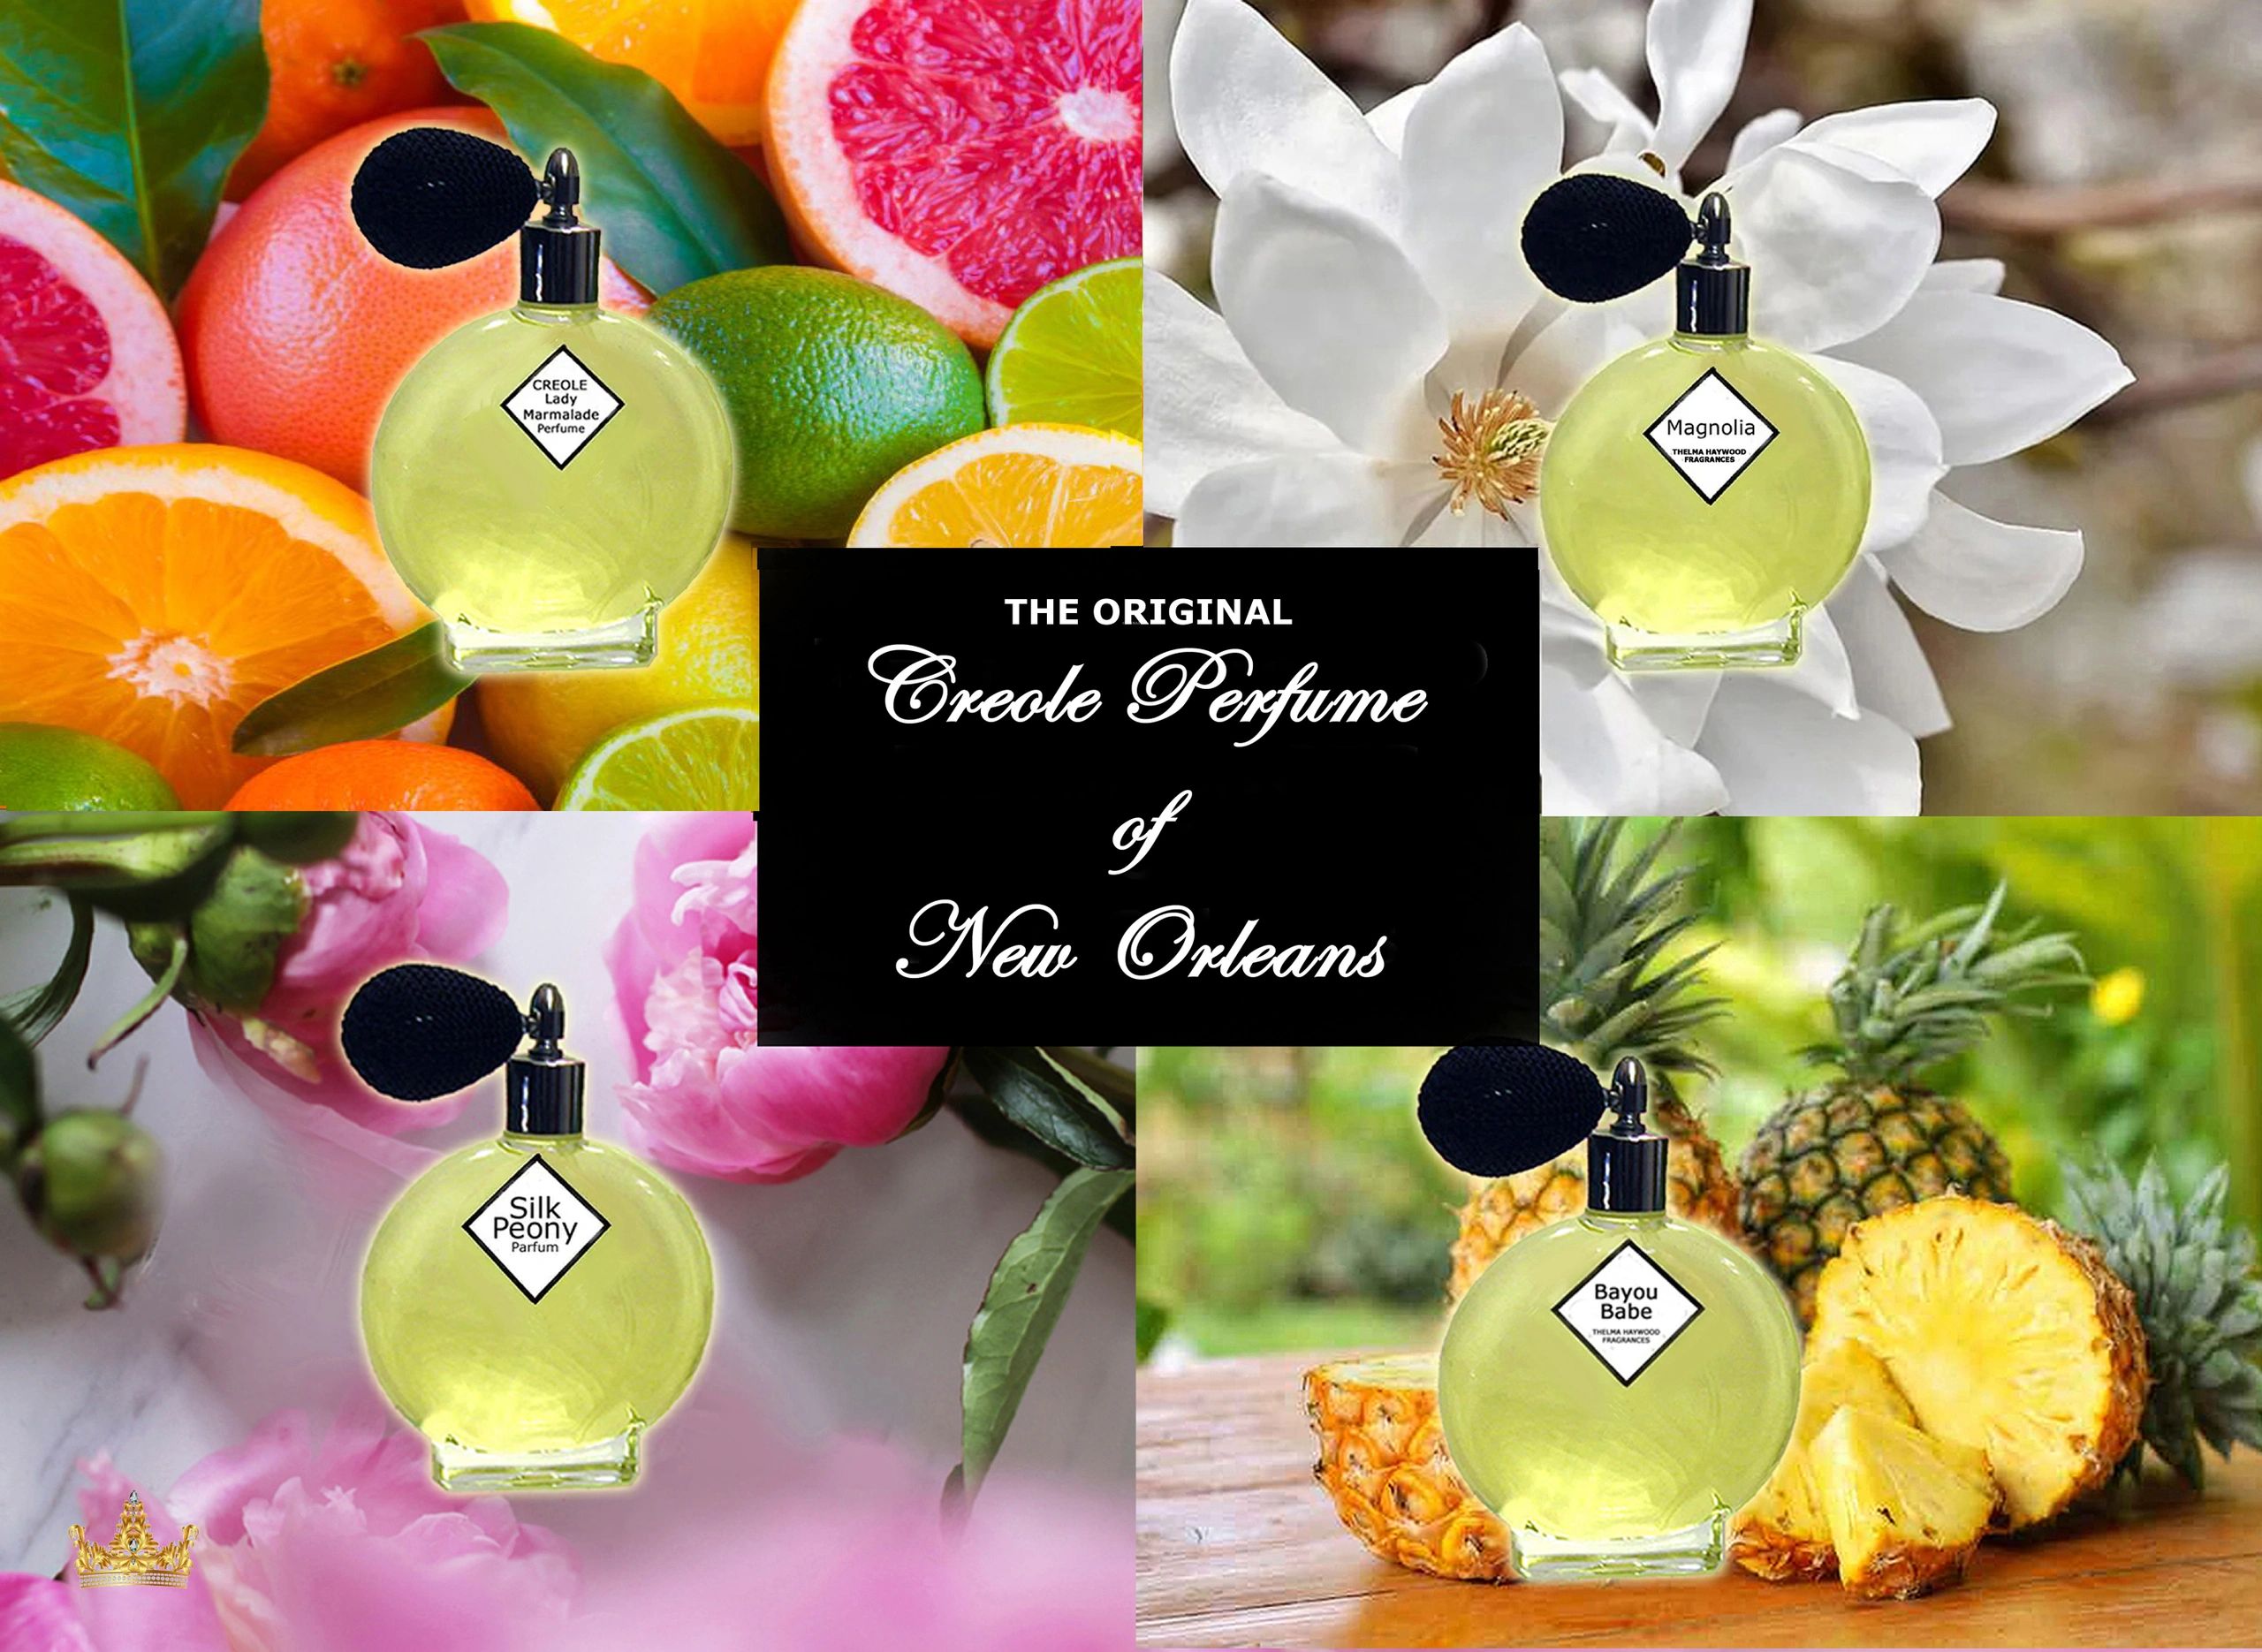 The Original Creole Perfume of New Orleans